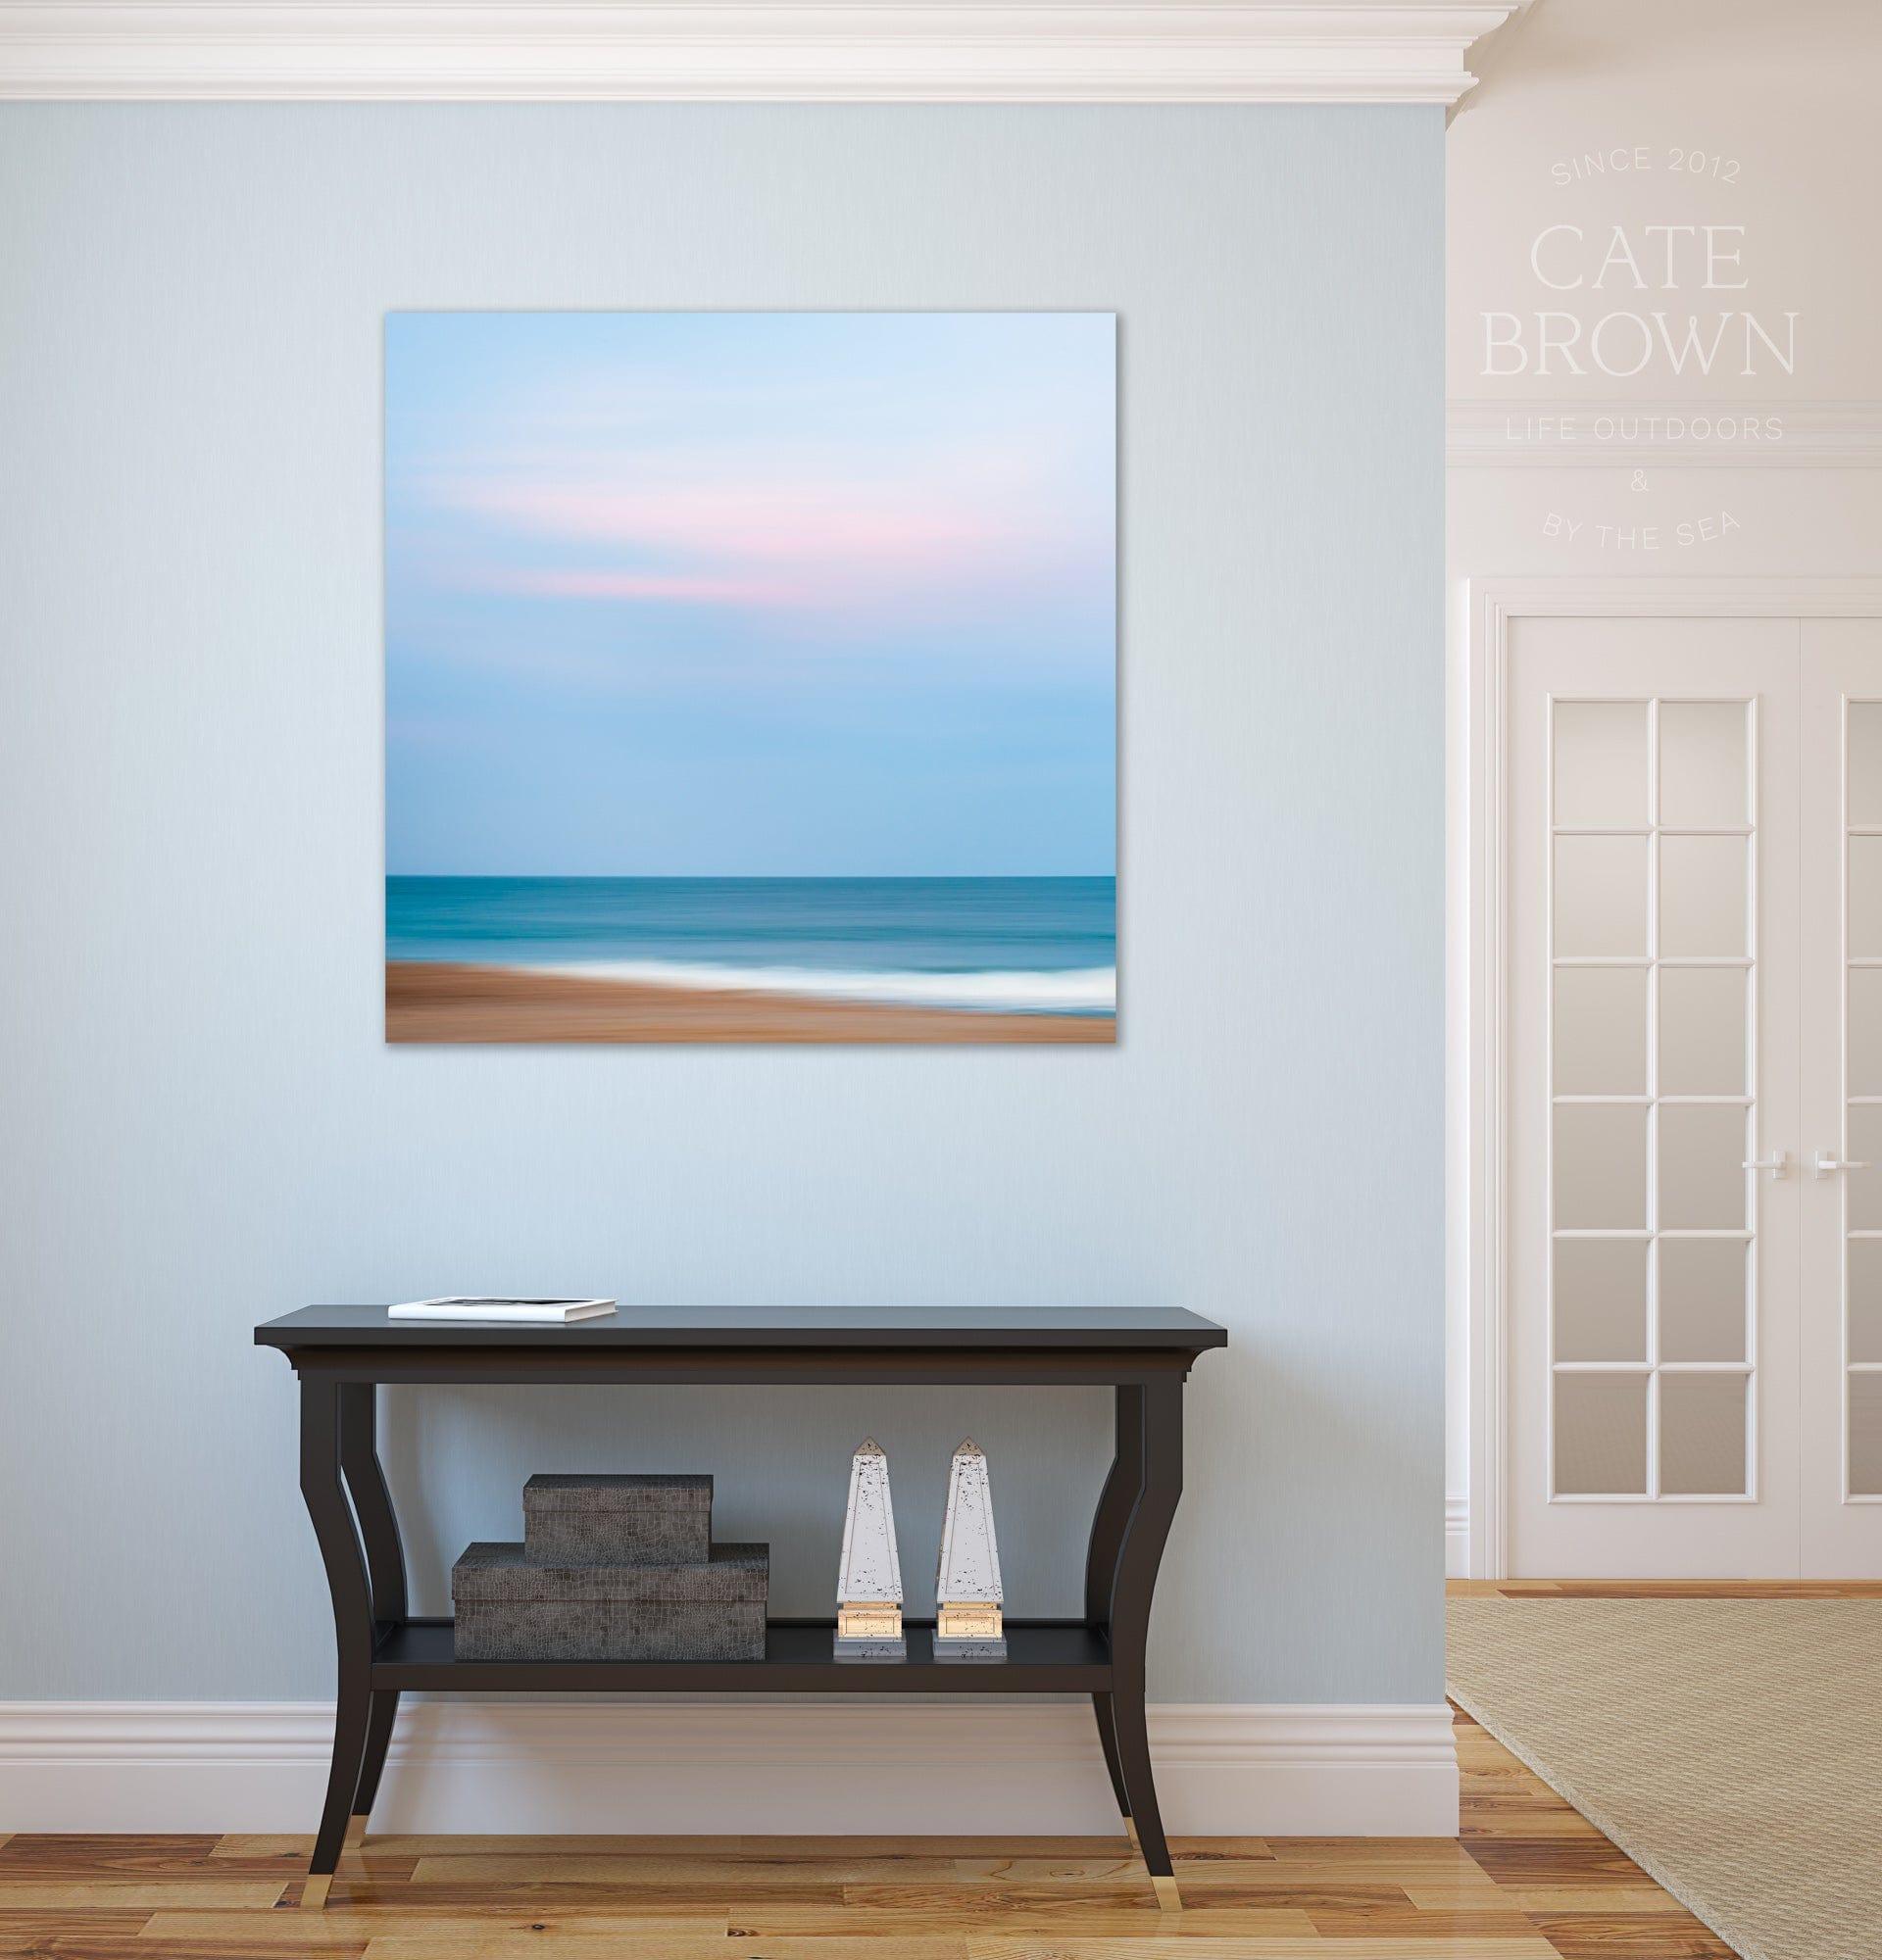 Cate Brown Photo Canvas / 16"x16" / None (Print Only) Qeba #4  //  Abstract Photography Made to Order Ocean Fine Art